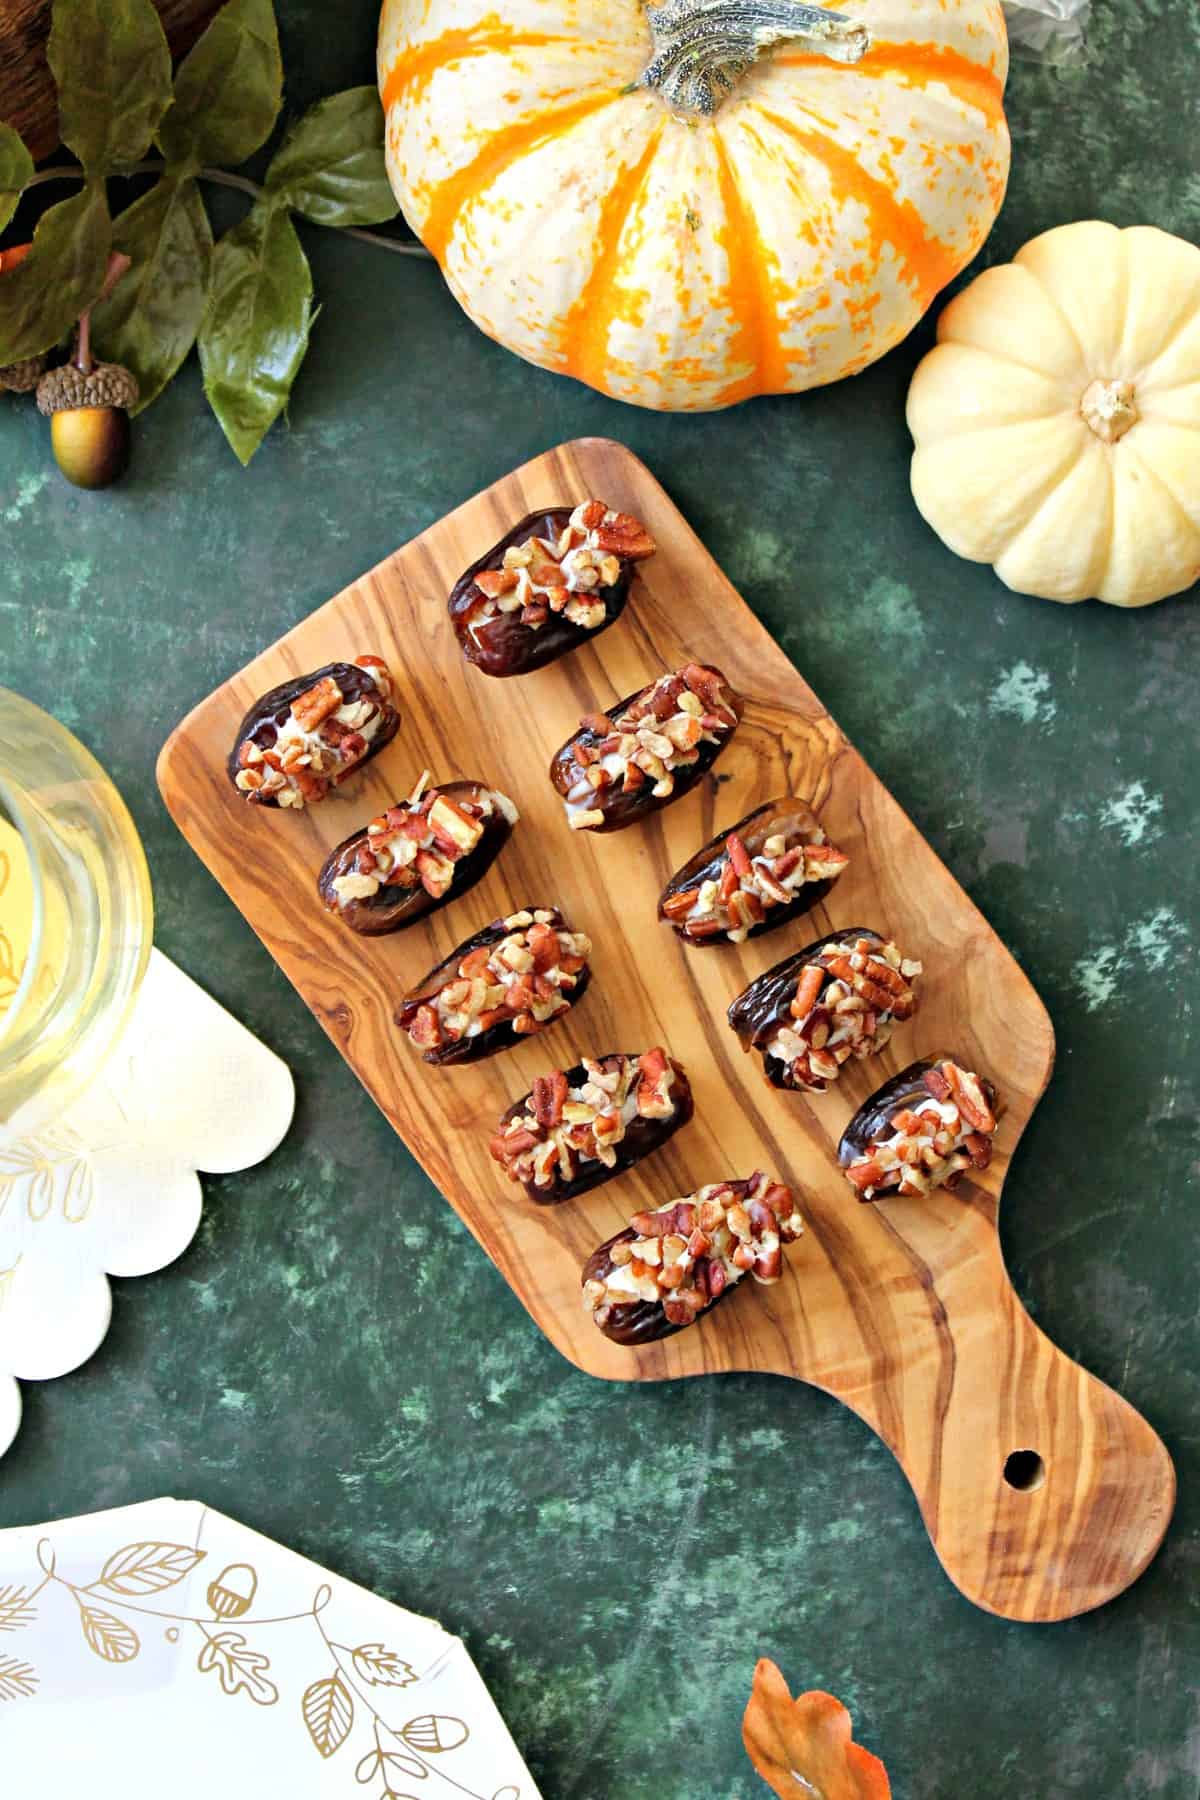 Honey-Cinnamon Cream Cheese Stuffed Dates! Sweet, sticky dates are stuffed full of honey-sweetened, cinnamon-spiced cream cheese, then rolled in crunchy roasted pecans. A perfect snack or appetizer to prepare last minute holiday entertaining! 